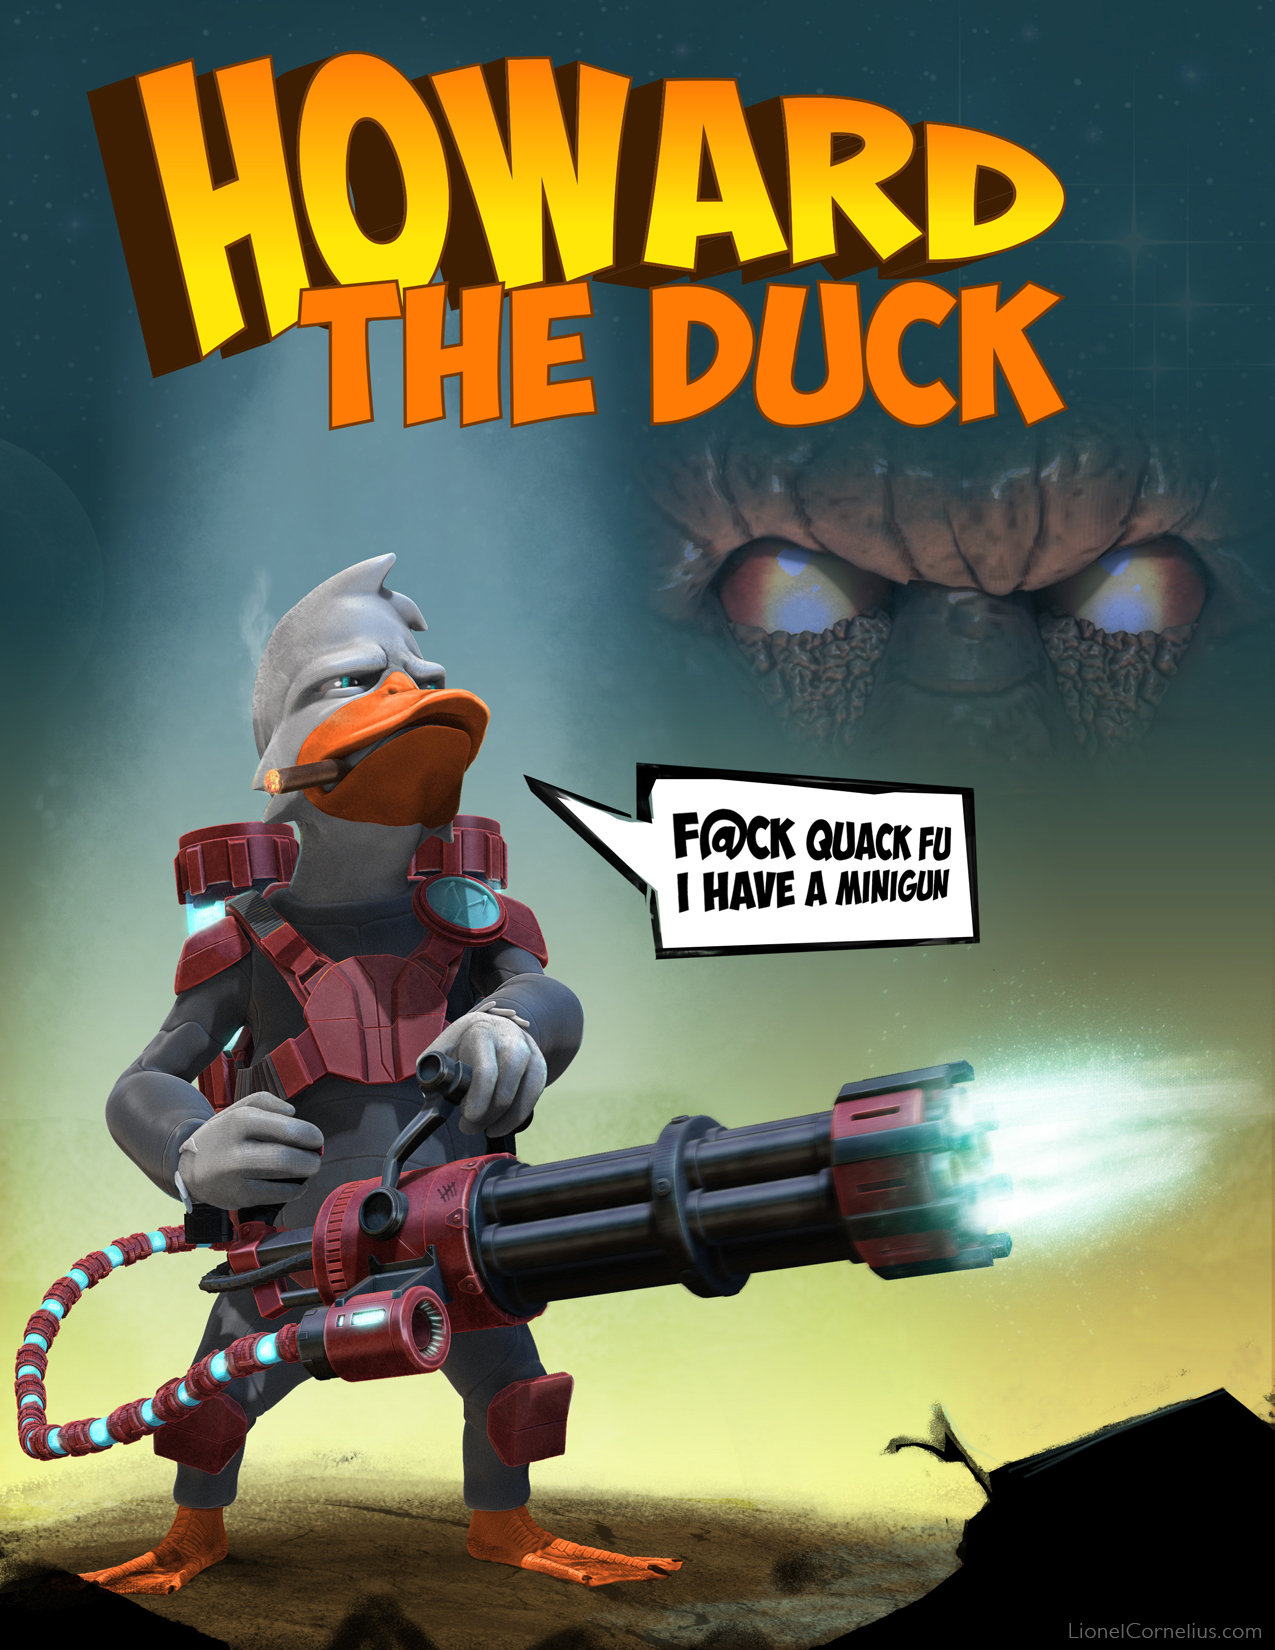 Howard The Duck in the MCU, Please - as of the end of 'Avengers: Endgame',  Howie is trapped in a world he never made!!! He needs a job (P.I.?  Quack-Fu fighter in 